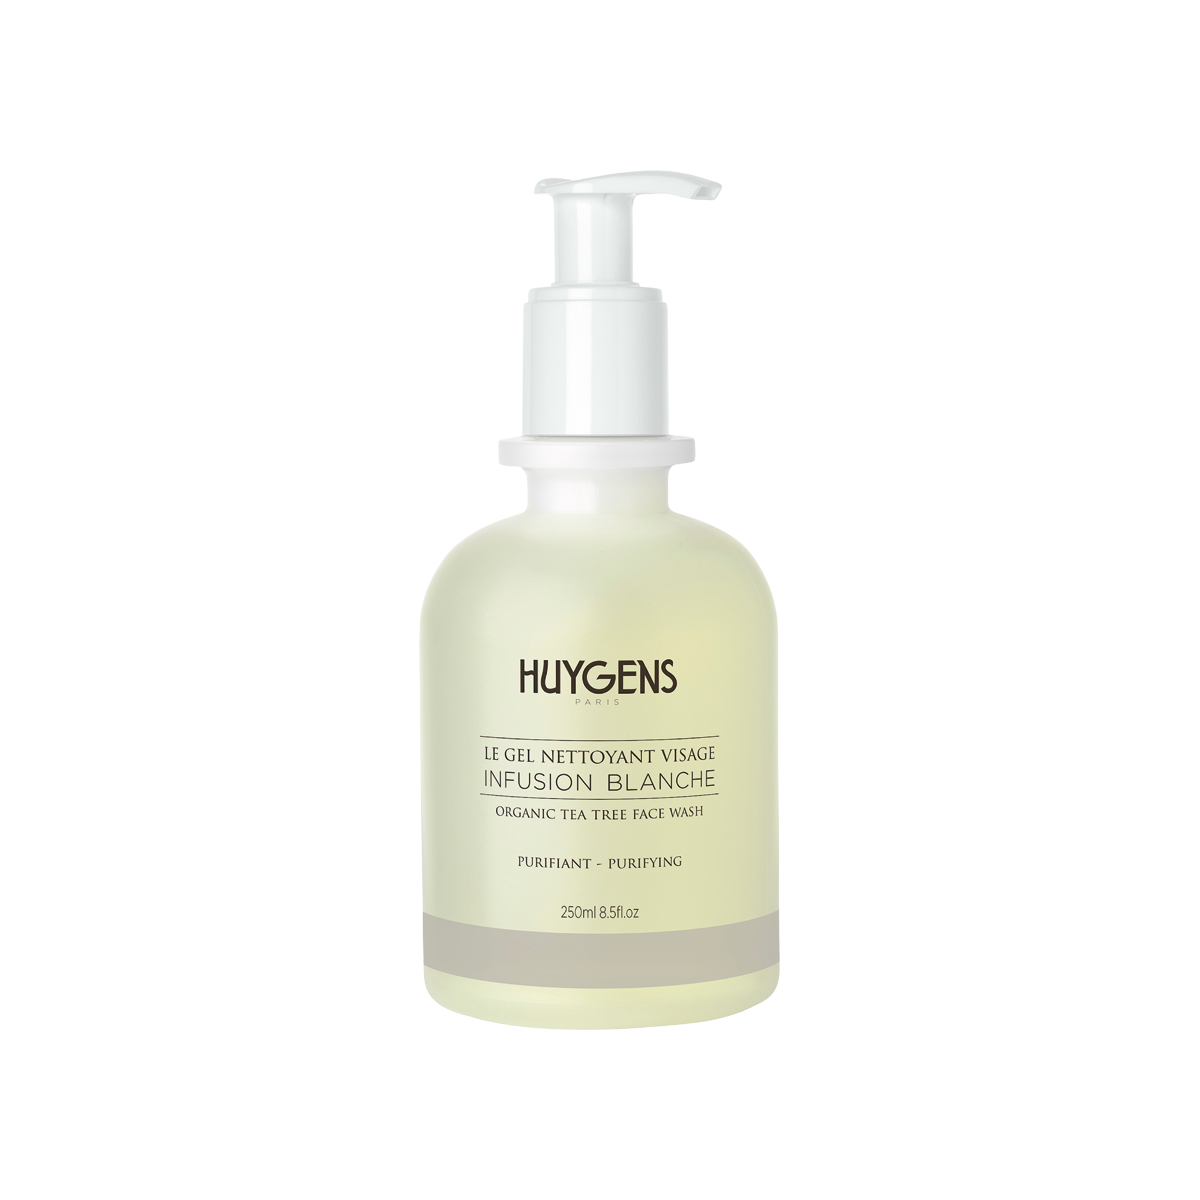 Huygens - Infusion Blanche Purifying Face Wash